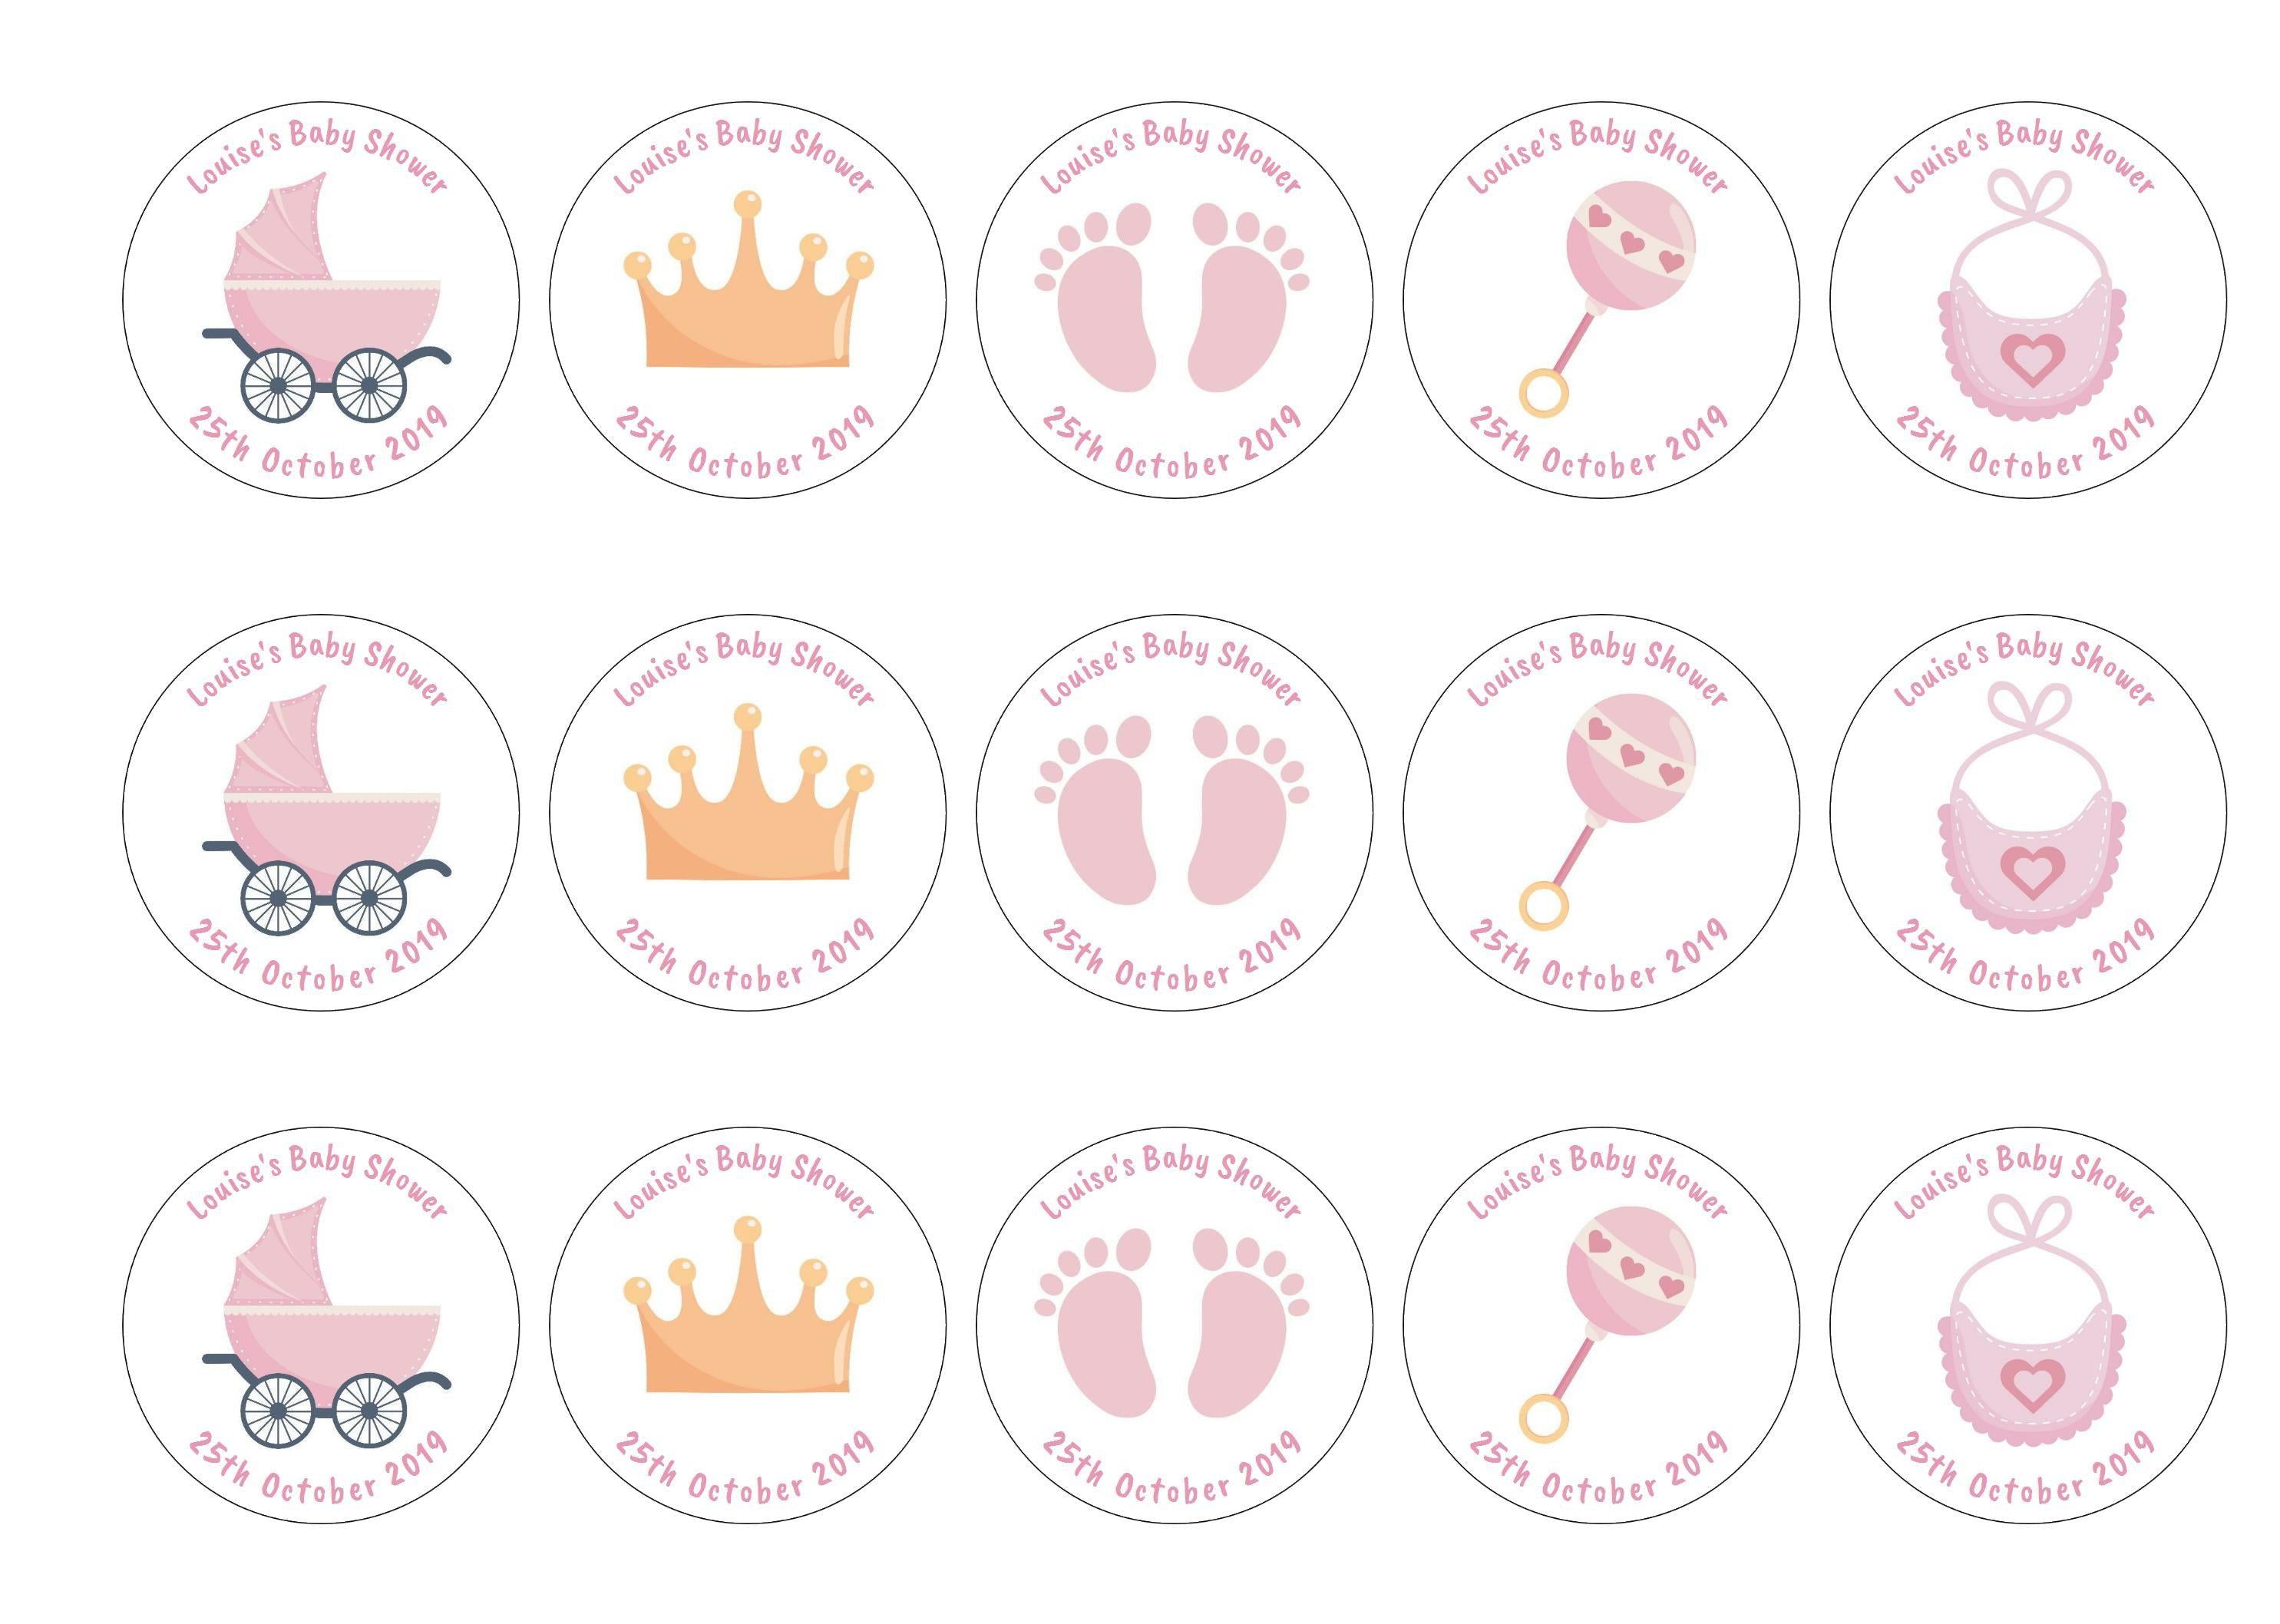 15 baby shower toppers with pink baby icons